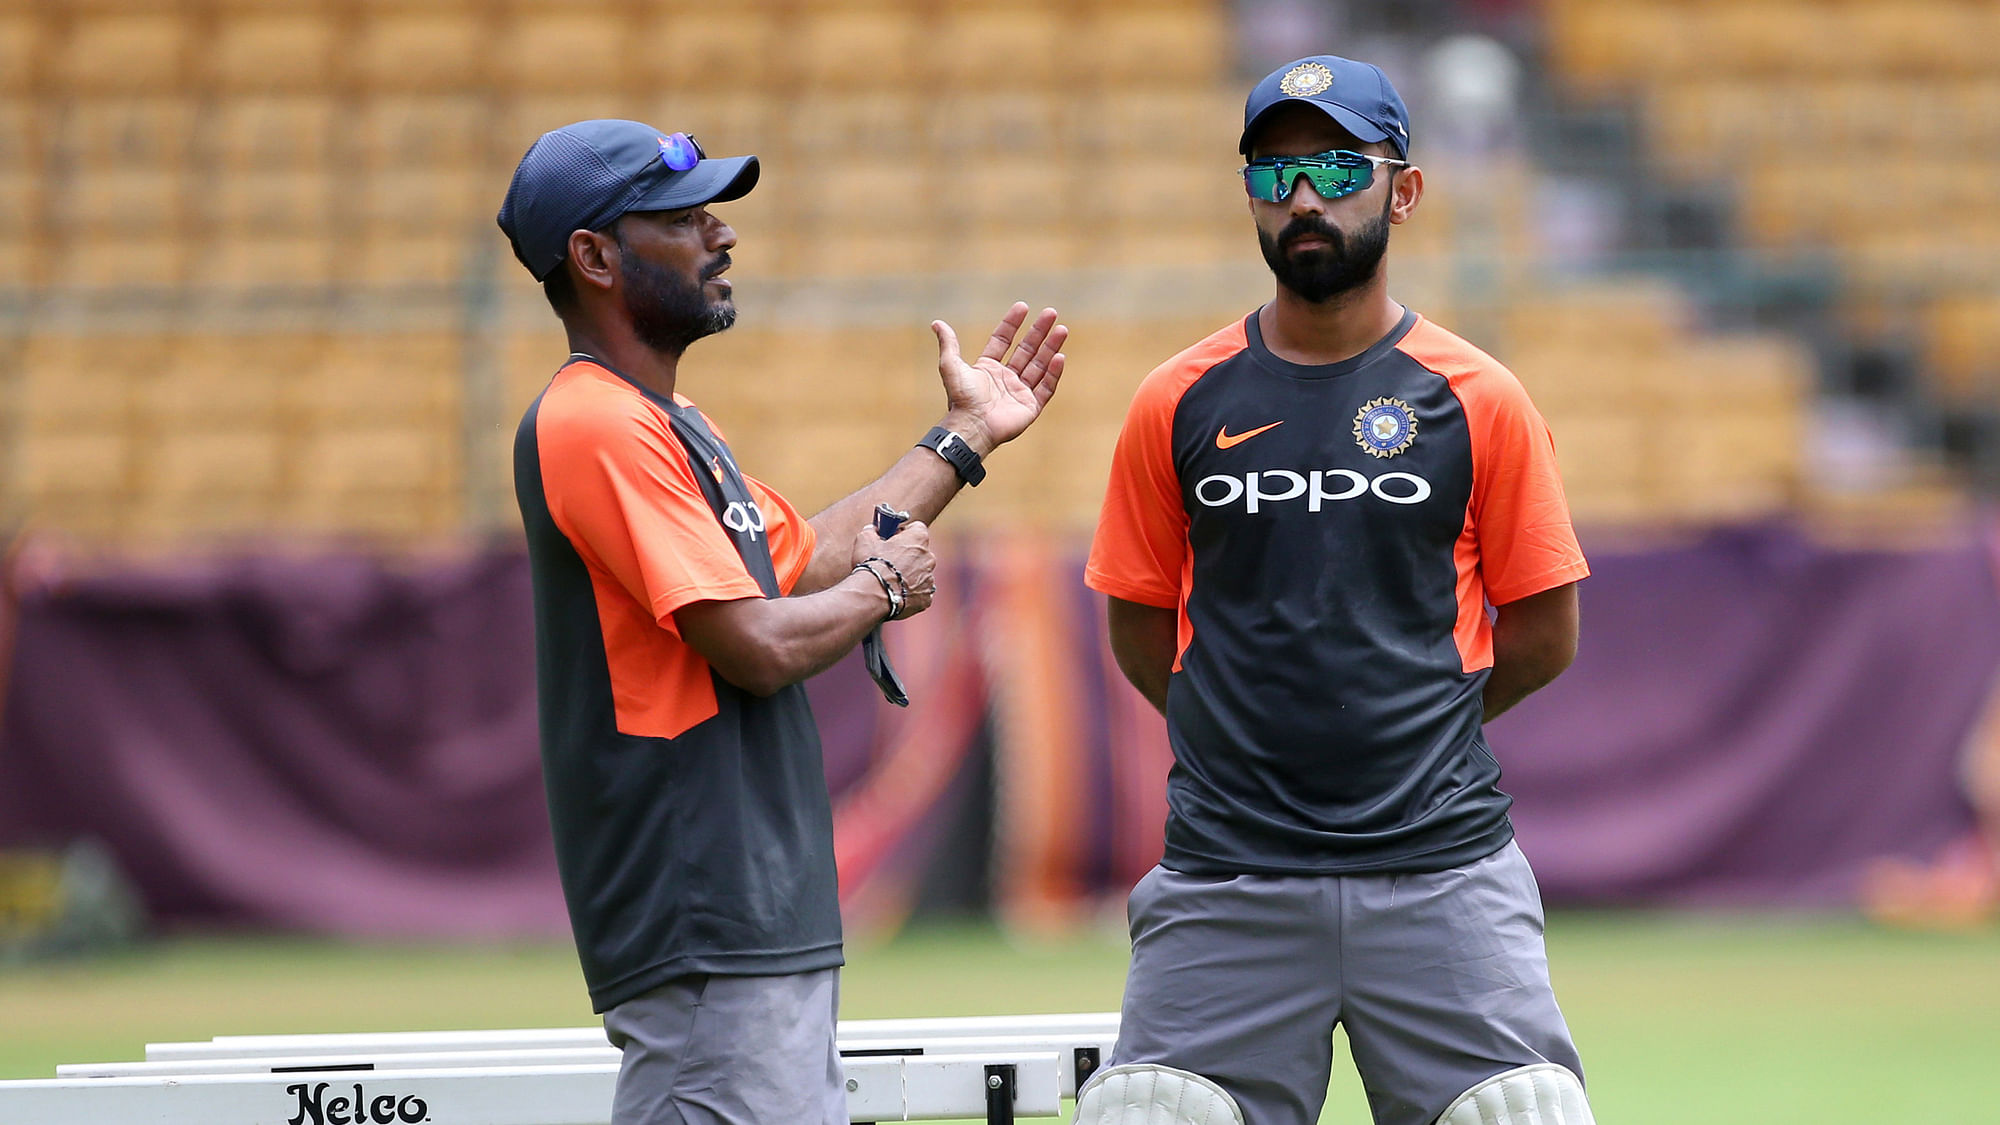 “We want to go out there and be ruthless,” said stand-in captain Ajinkya Rahane ahead of Afghanistan’s first ever Test.